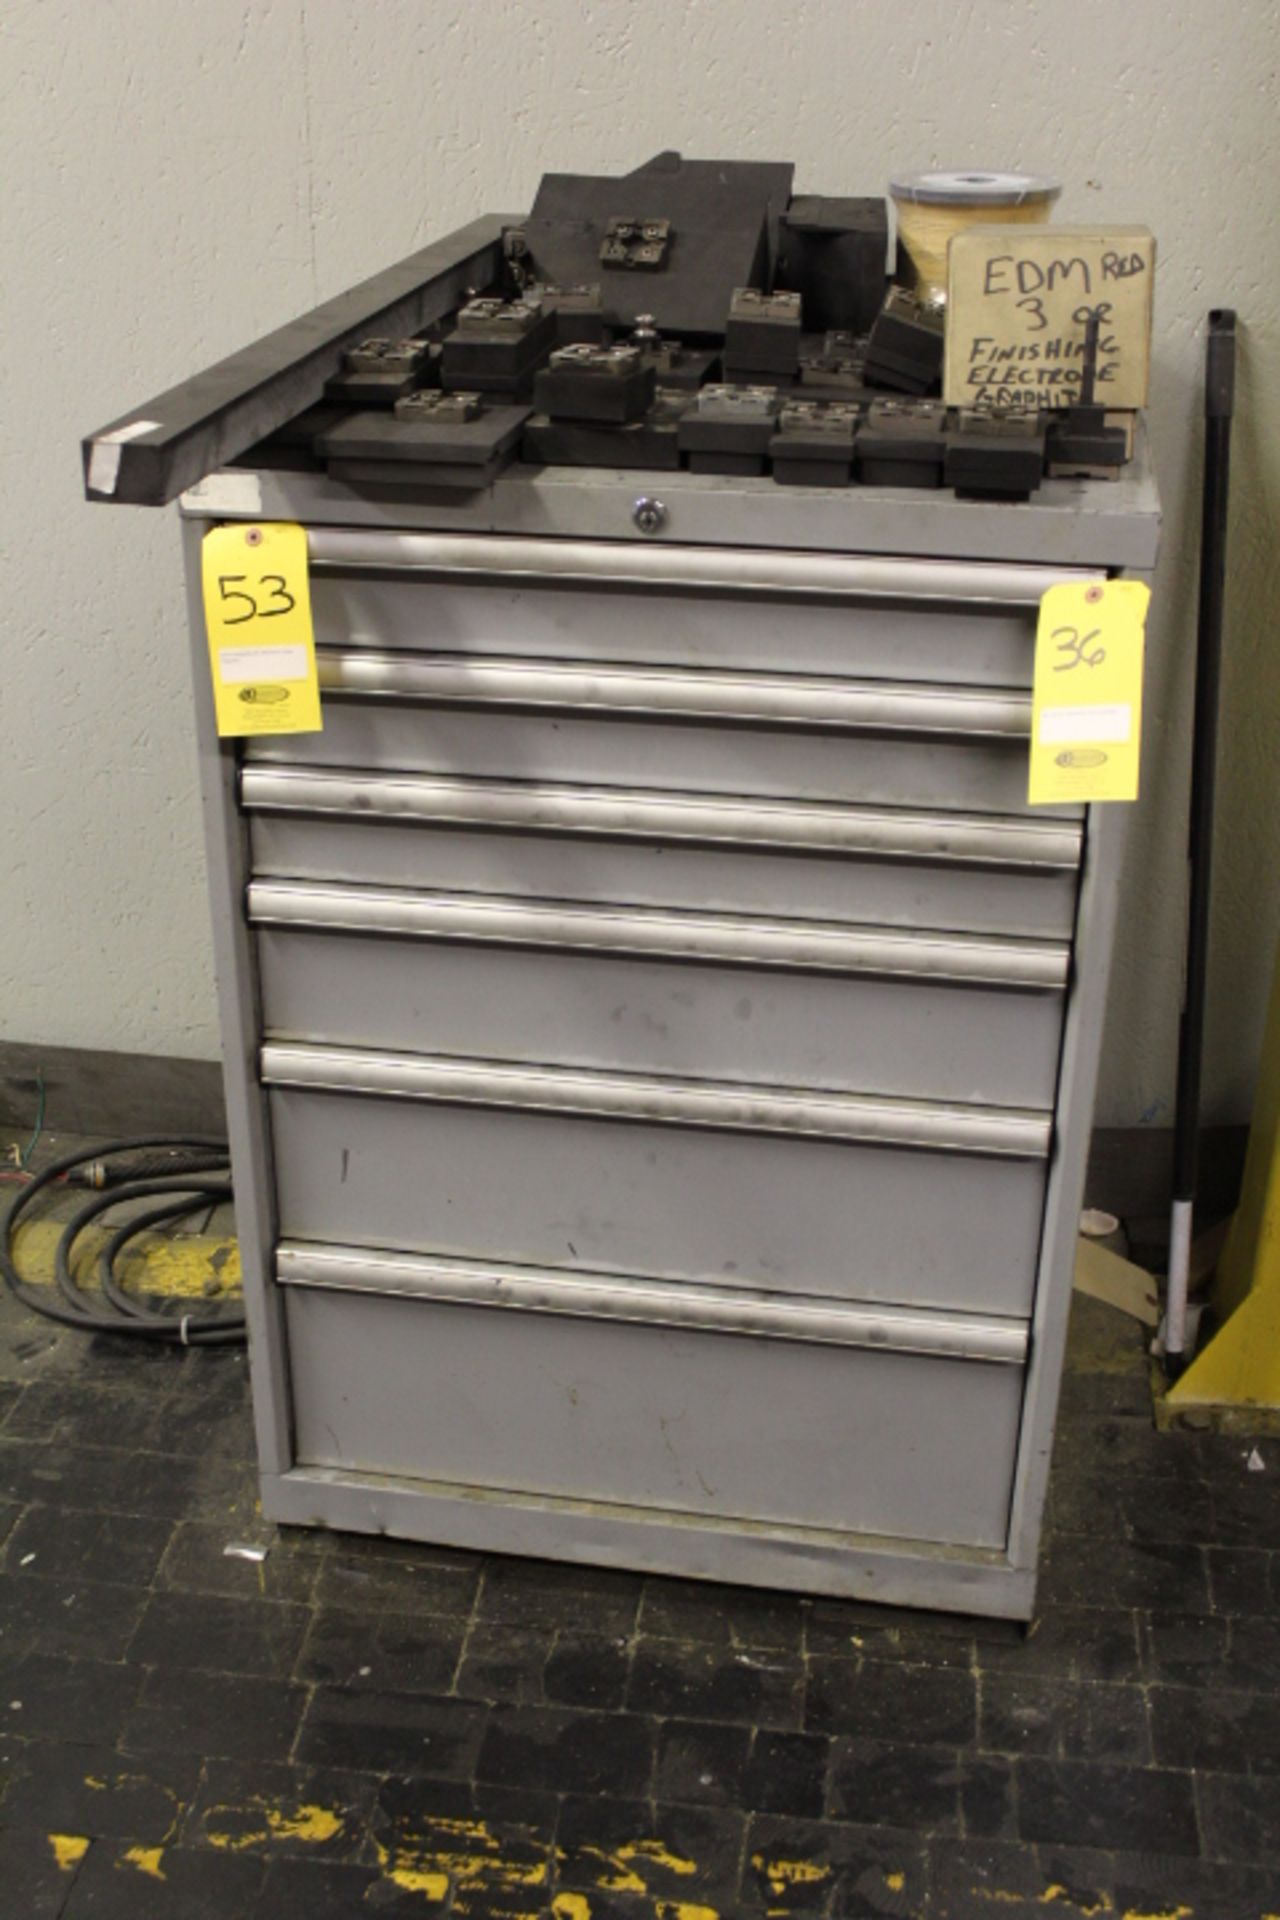 LISTA 6-DRAWER TOOL CABINET